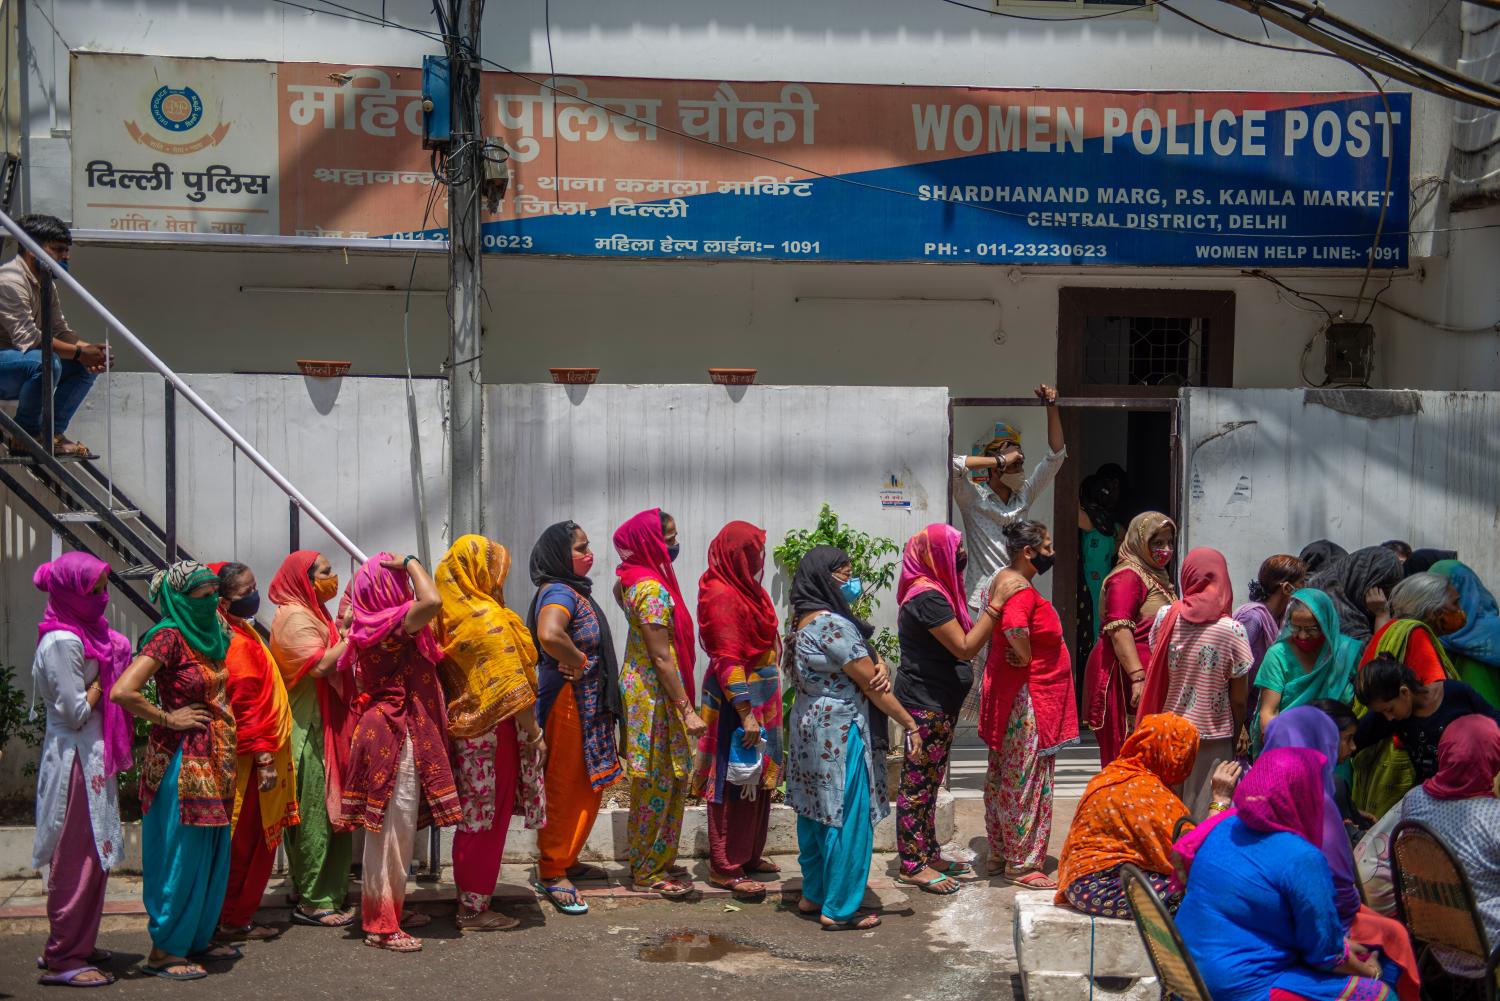 Sex workers wait in a queue to receive free rations at G B Road, kamla market during the distribution.Under the programme 'Seva Hi Sangathan' BJP (Bharatiya Janata Party) is distributing free food rations across India, helping those in need amid Coronavirus crisis. (Photo by Pradeep Gaur / SOPA Images/Sipa USA)No Use Germany.